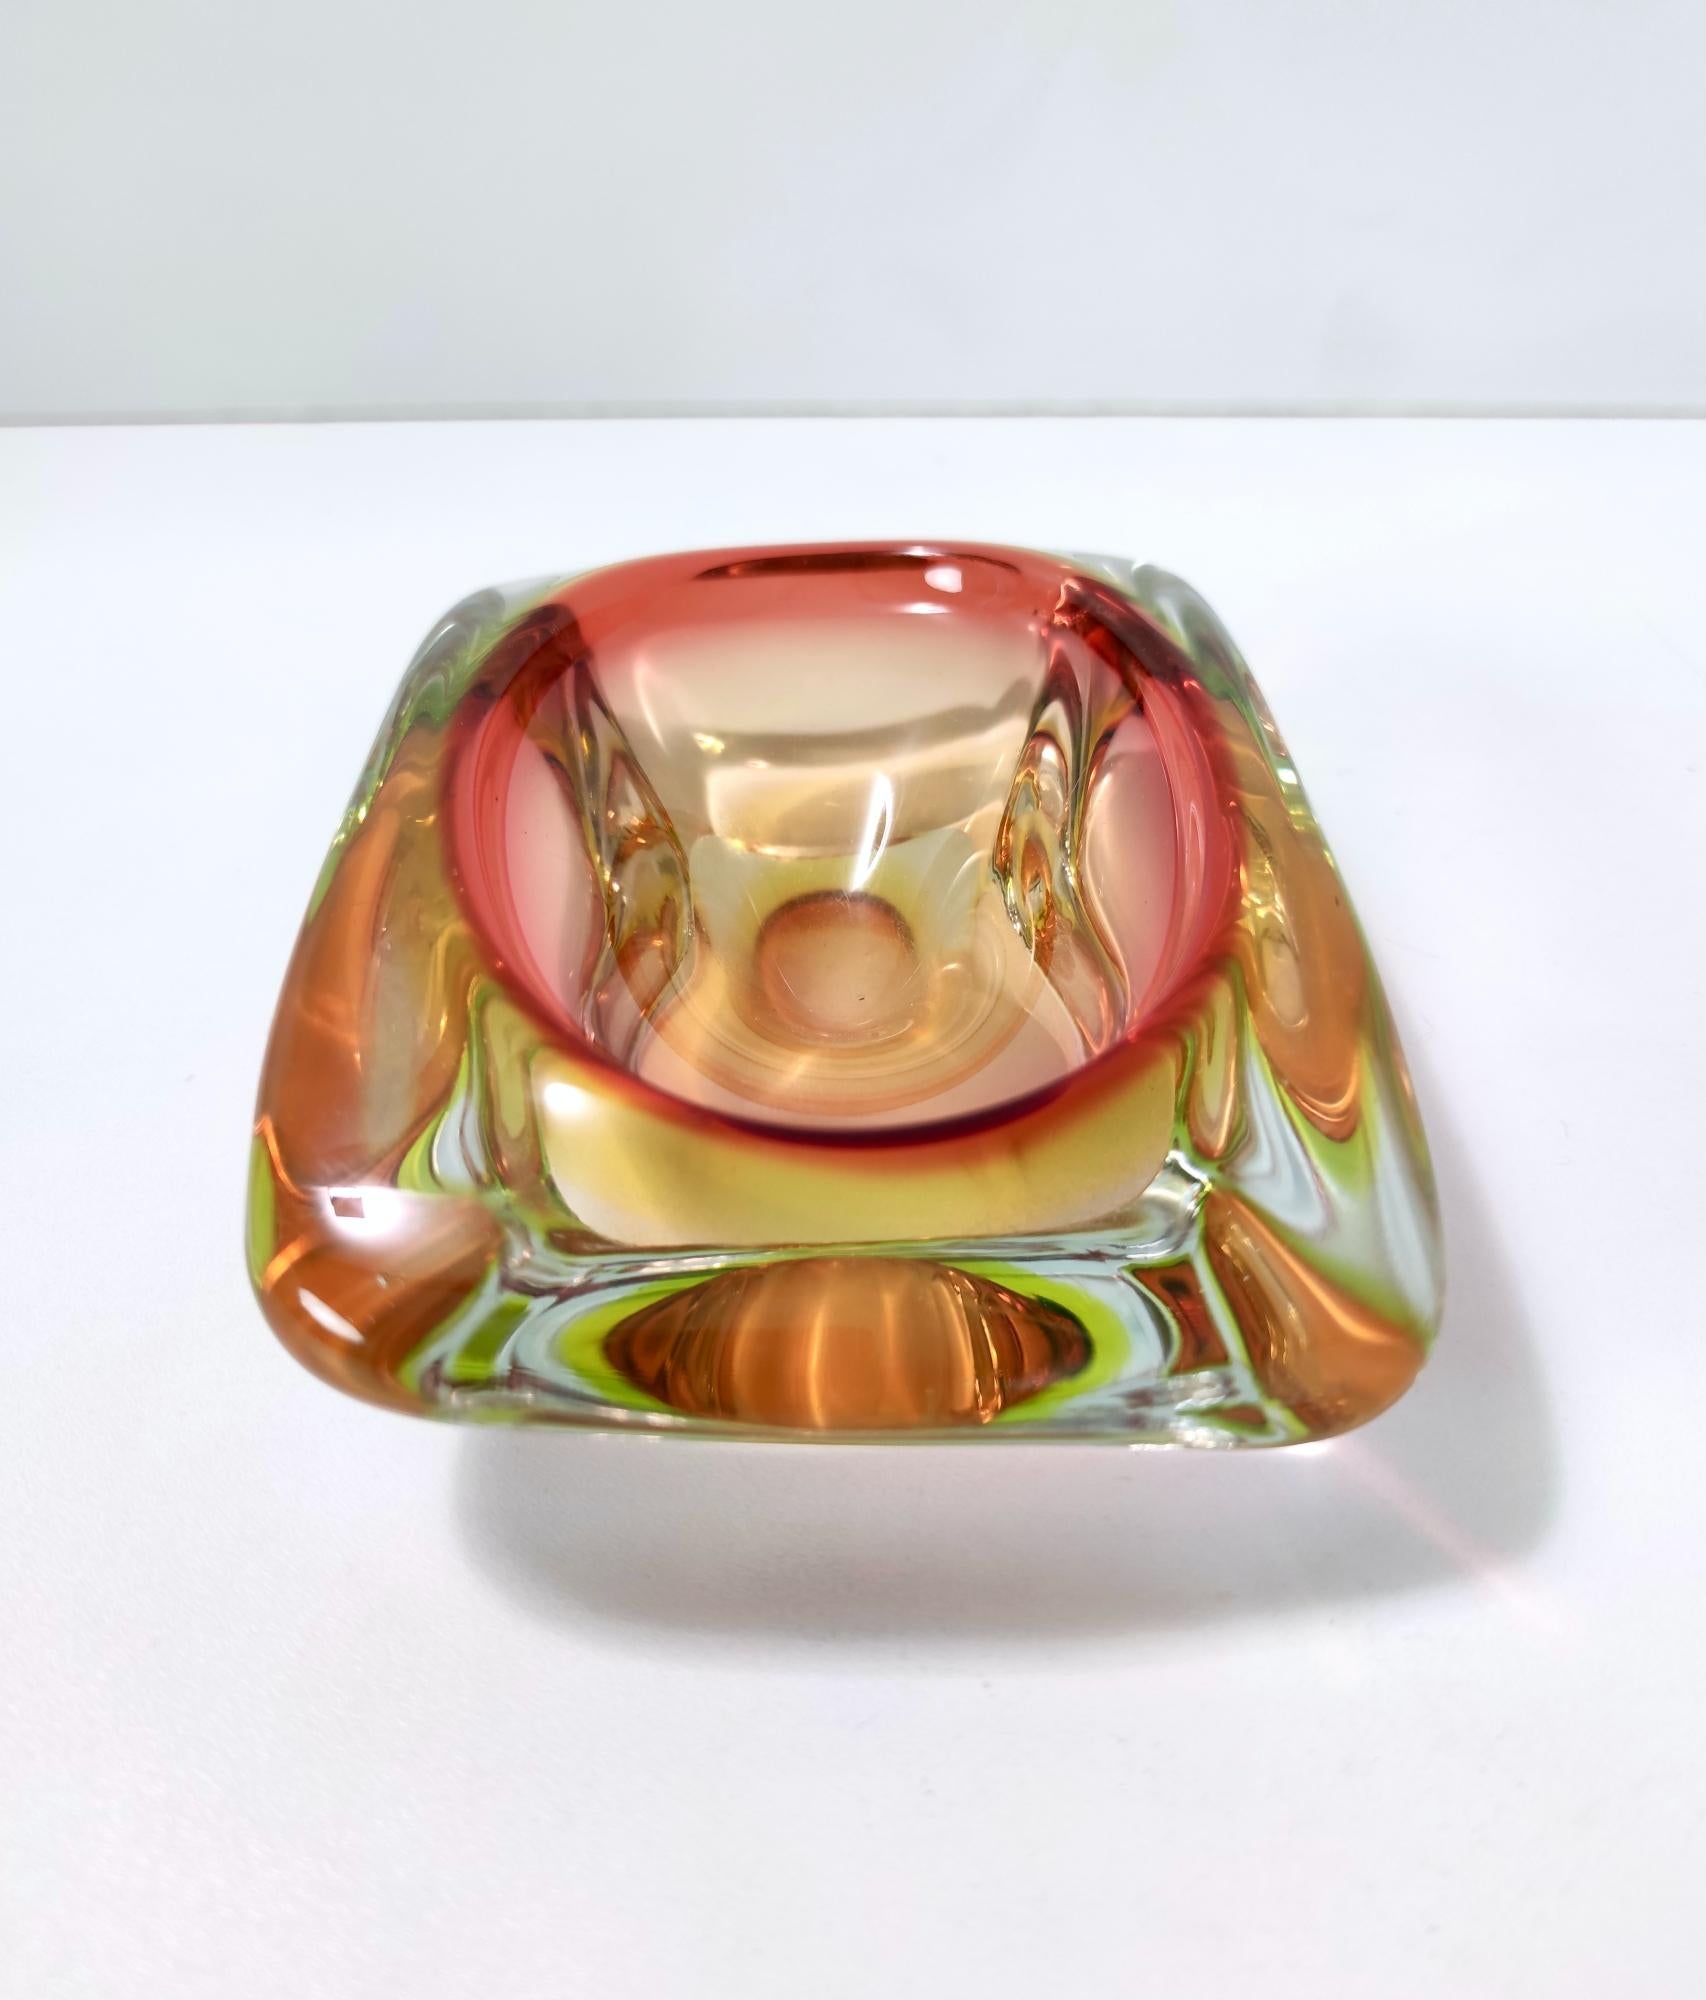 Orange Red Sommerso Glass Ashtray or Catchall Ascribable to Flavio Poli, Italy 2